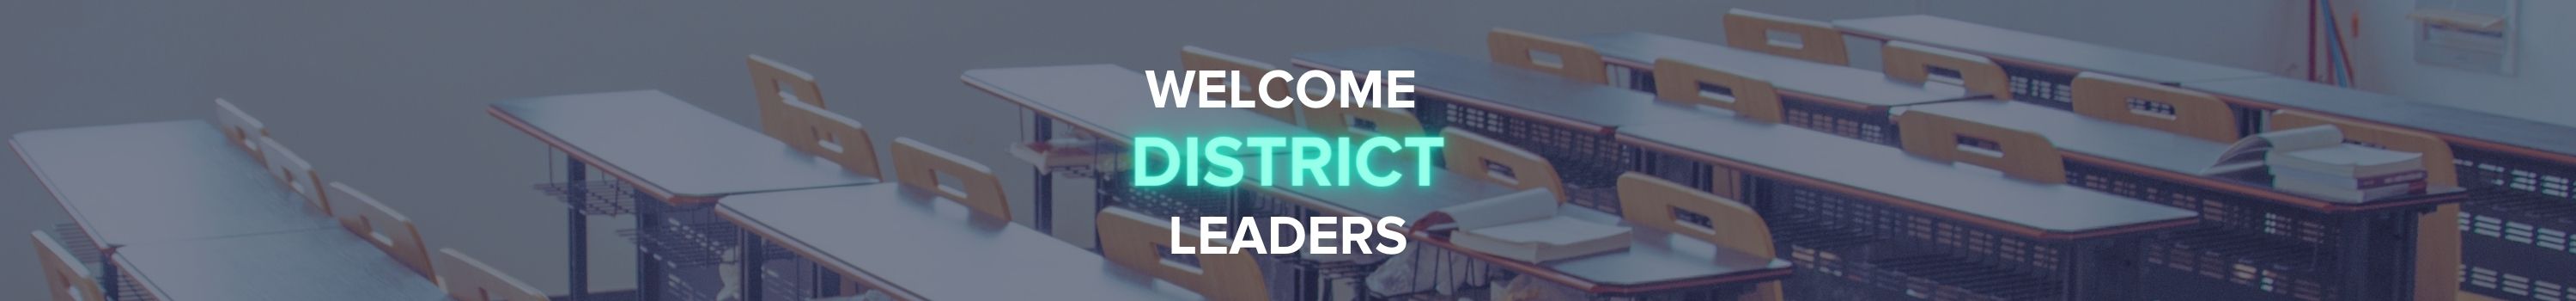 Welcome District Leaders